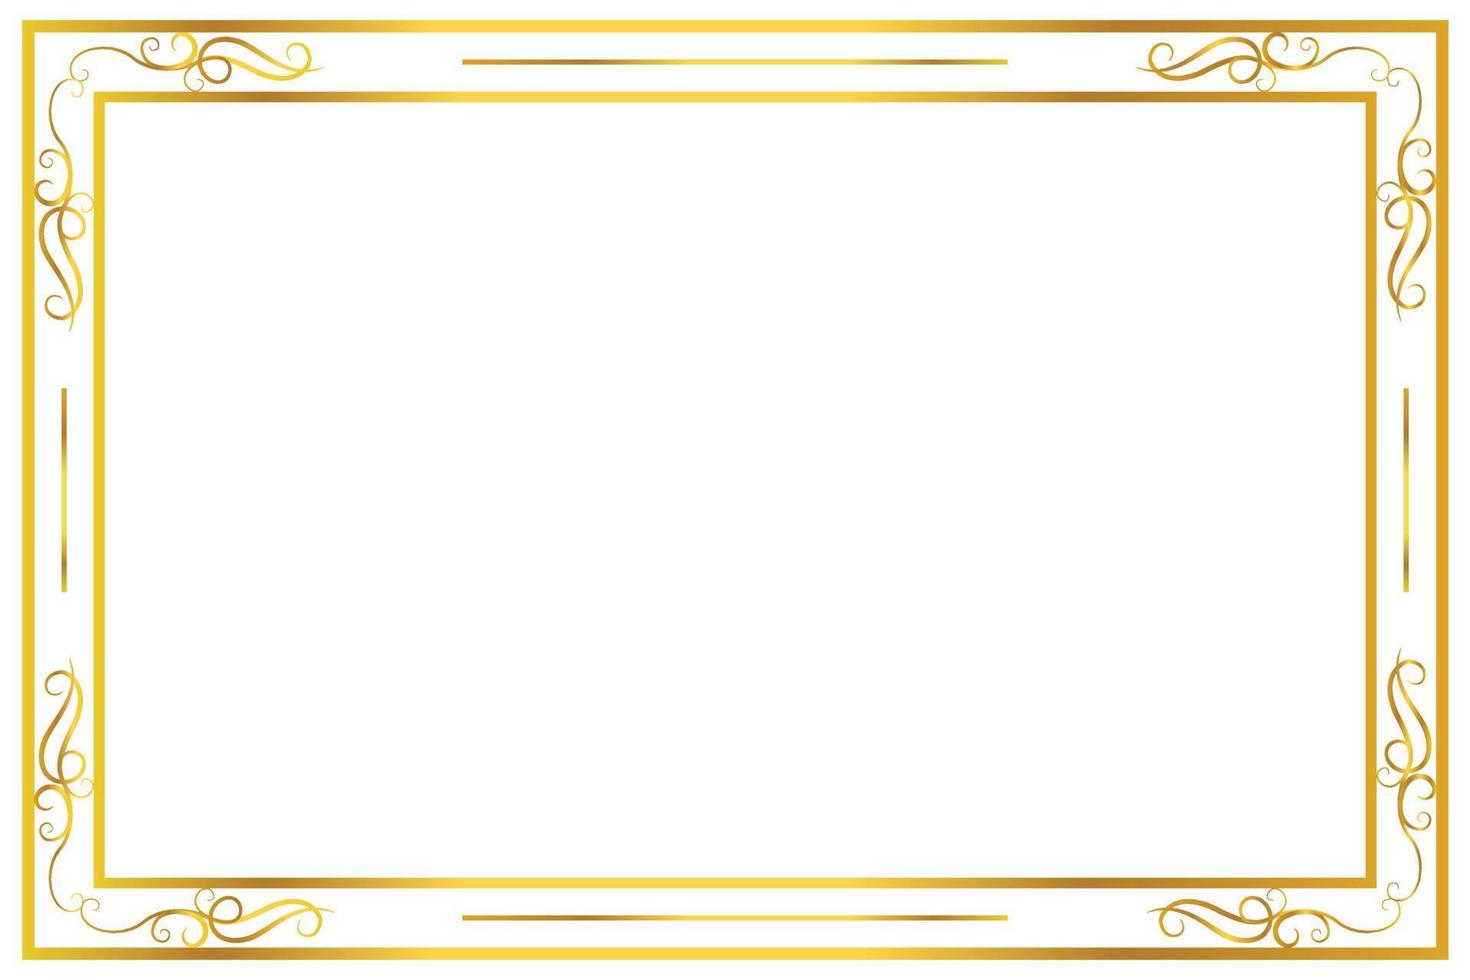 frame gold vector for work certificate, picture, website